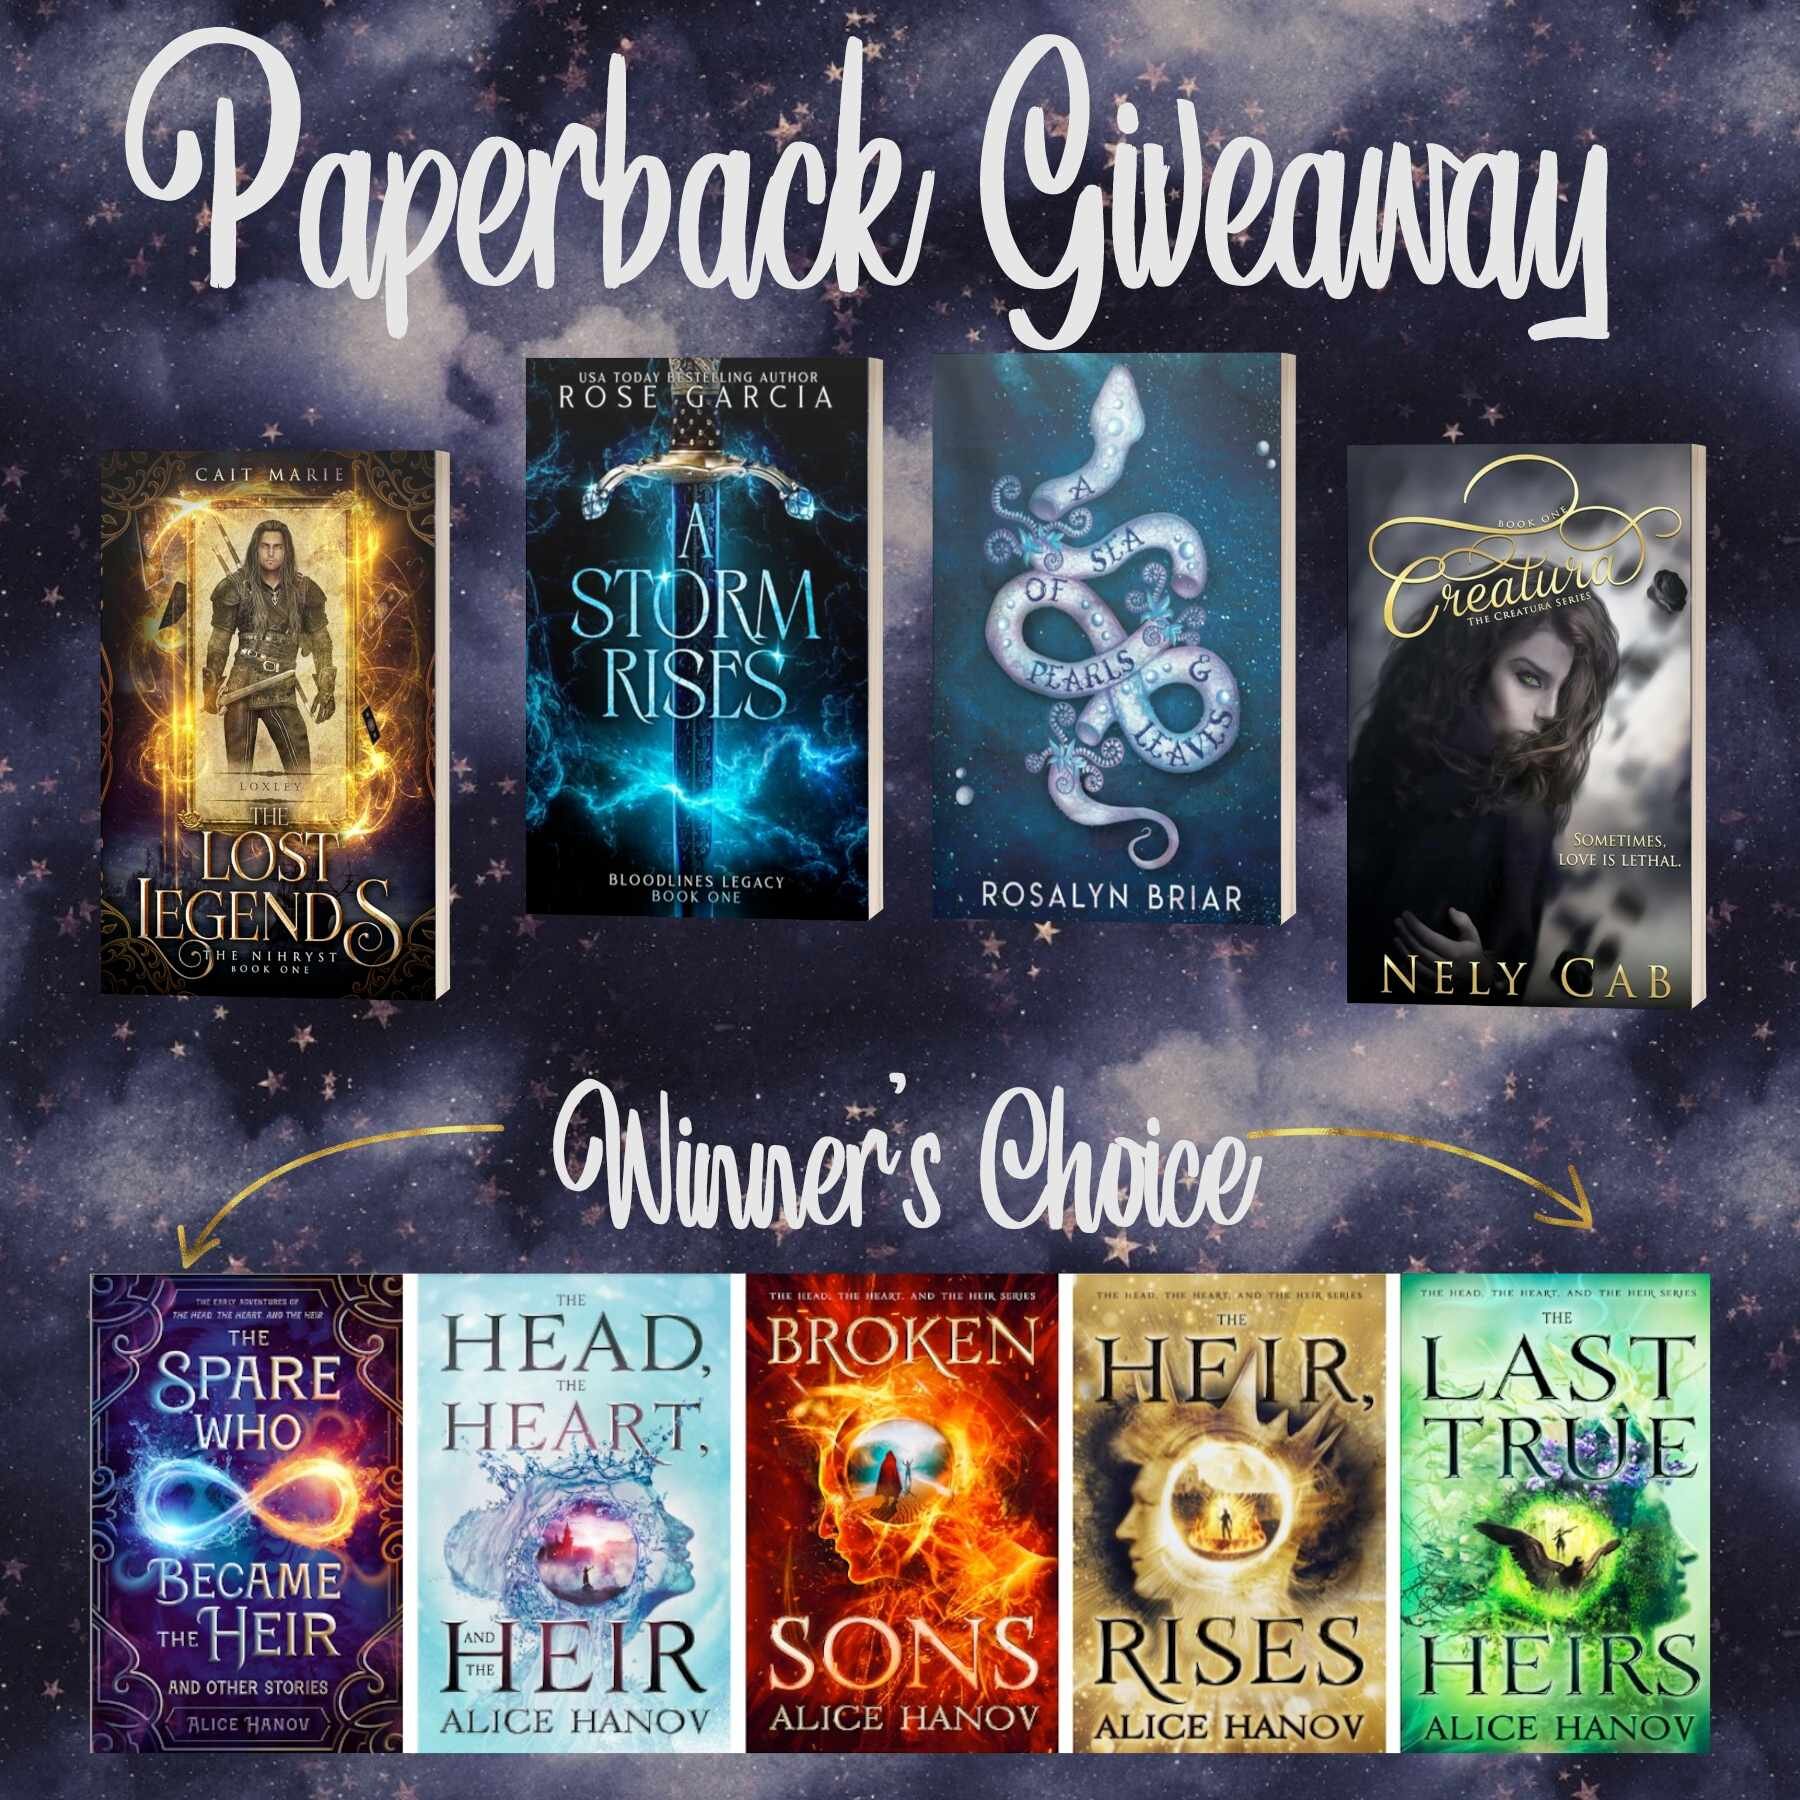 💚📚𝗜𝗡𝗦𝗧𝗔𝗚𝗥𝗔𝗠 𝗛𝗢𝗣📚💚
#paperback #giveaway
.
𝙏𝙄𝙏𝙇𝙀 The Last True Heirs
𝙎𝙀𝙍𝙄𝙀𝙎 The Head, the Heart, and the Heir Series Book 4
𝘼𝙐𝙏𝙃𝙊𝙍 Alice Hanov
.
To celebrate the release of the fourth book in The Head, the Heart and the